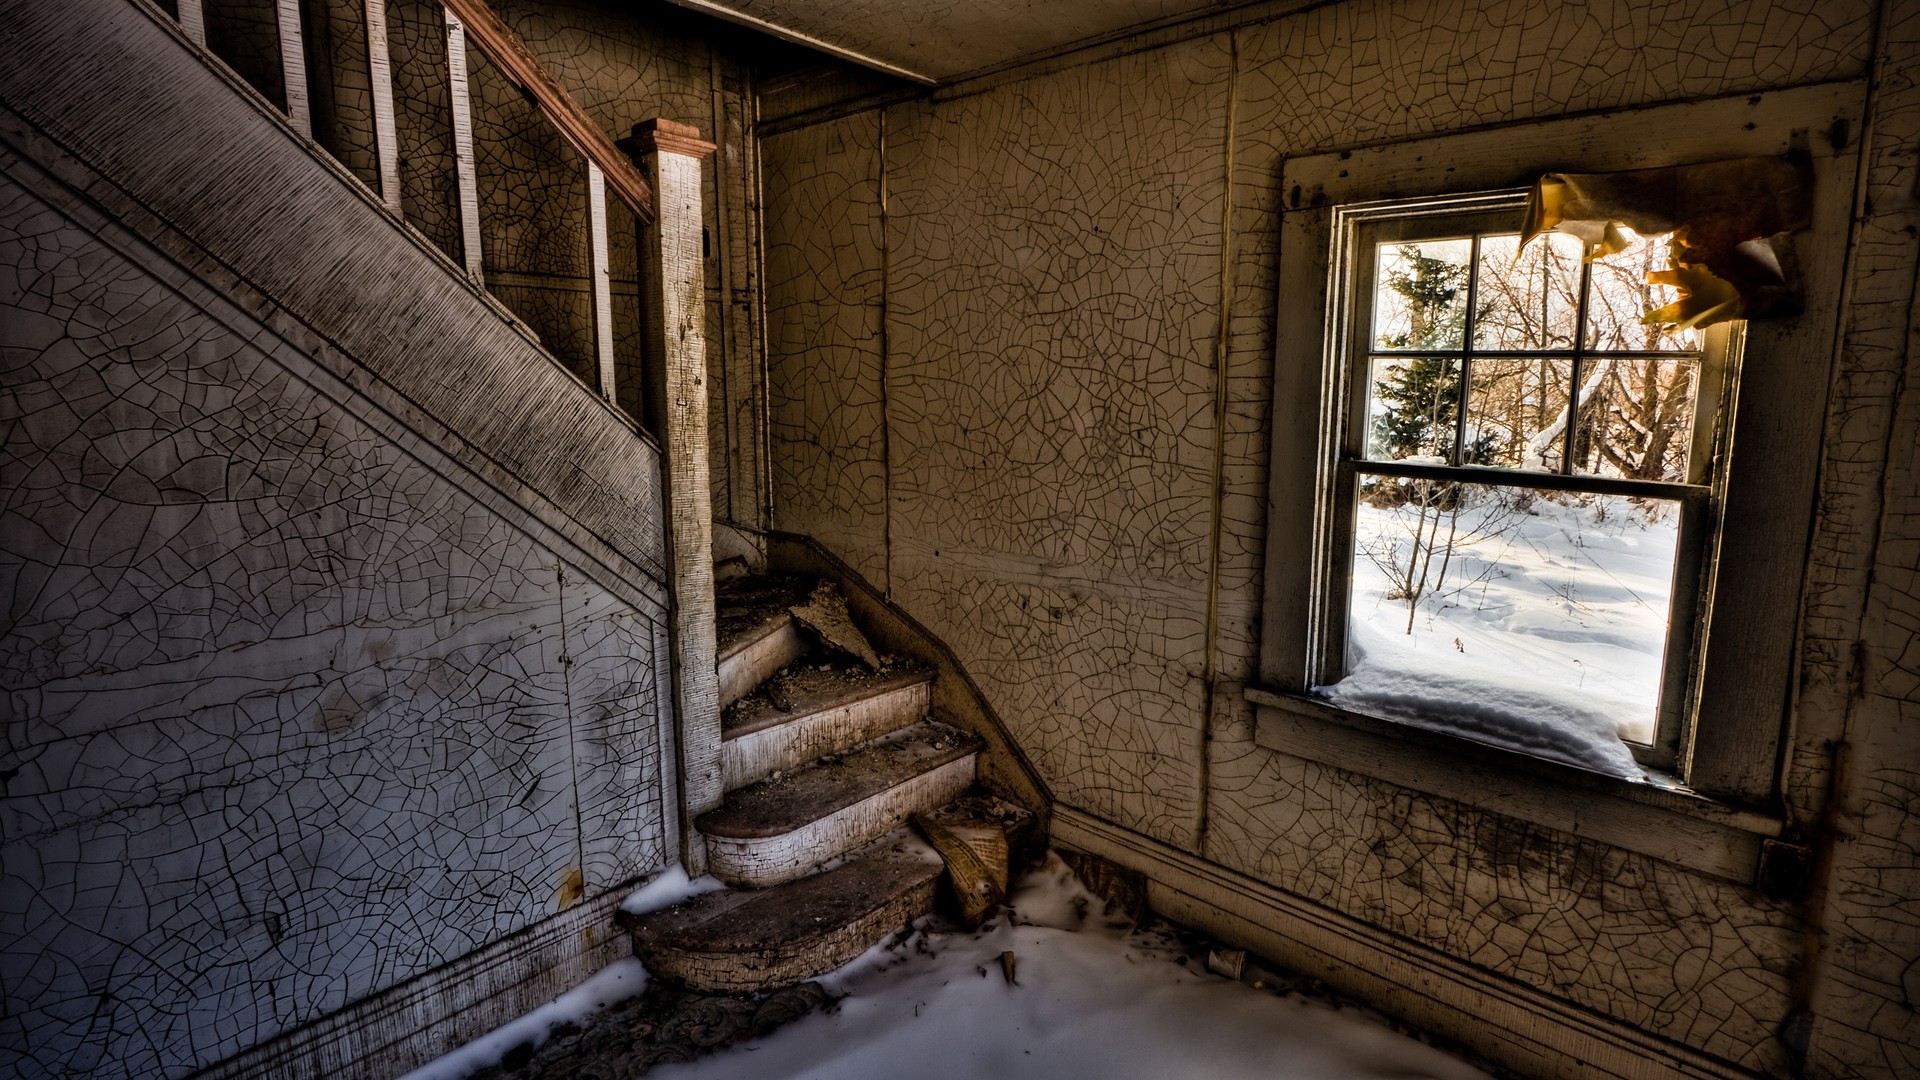 General 1920x1080 HDR abandoned house stairs window ruins snow